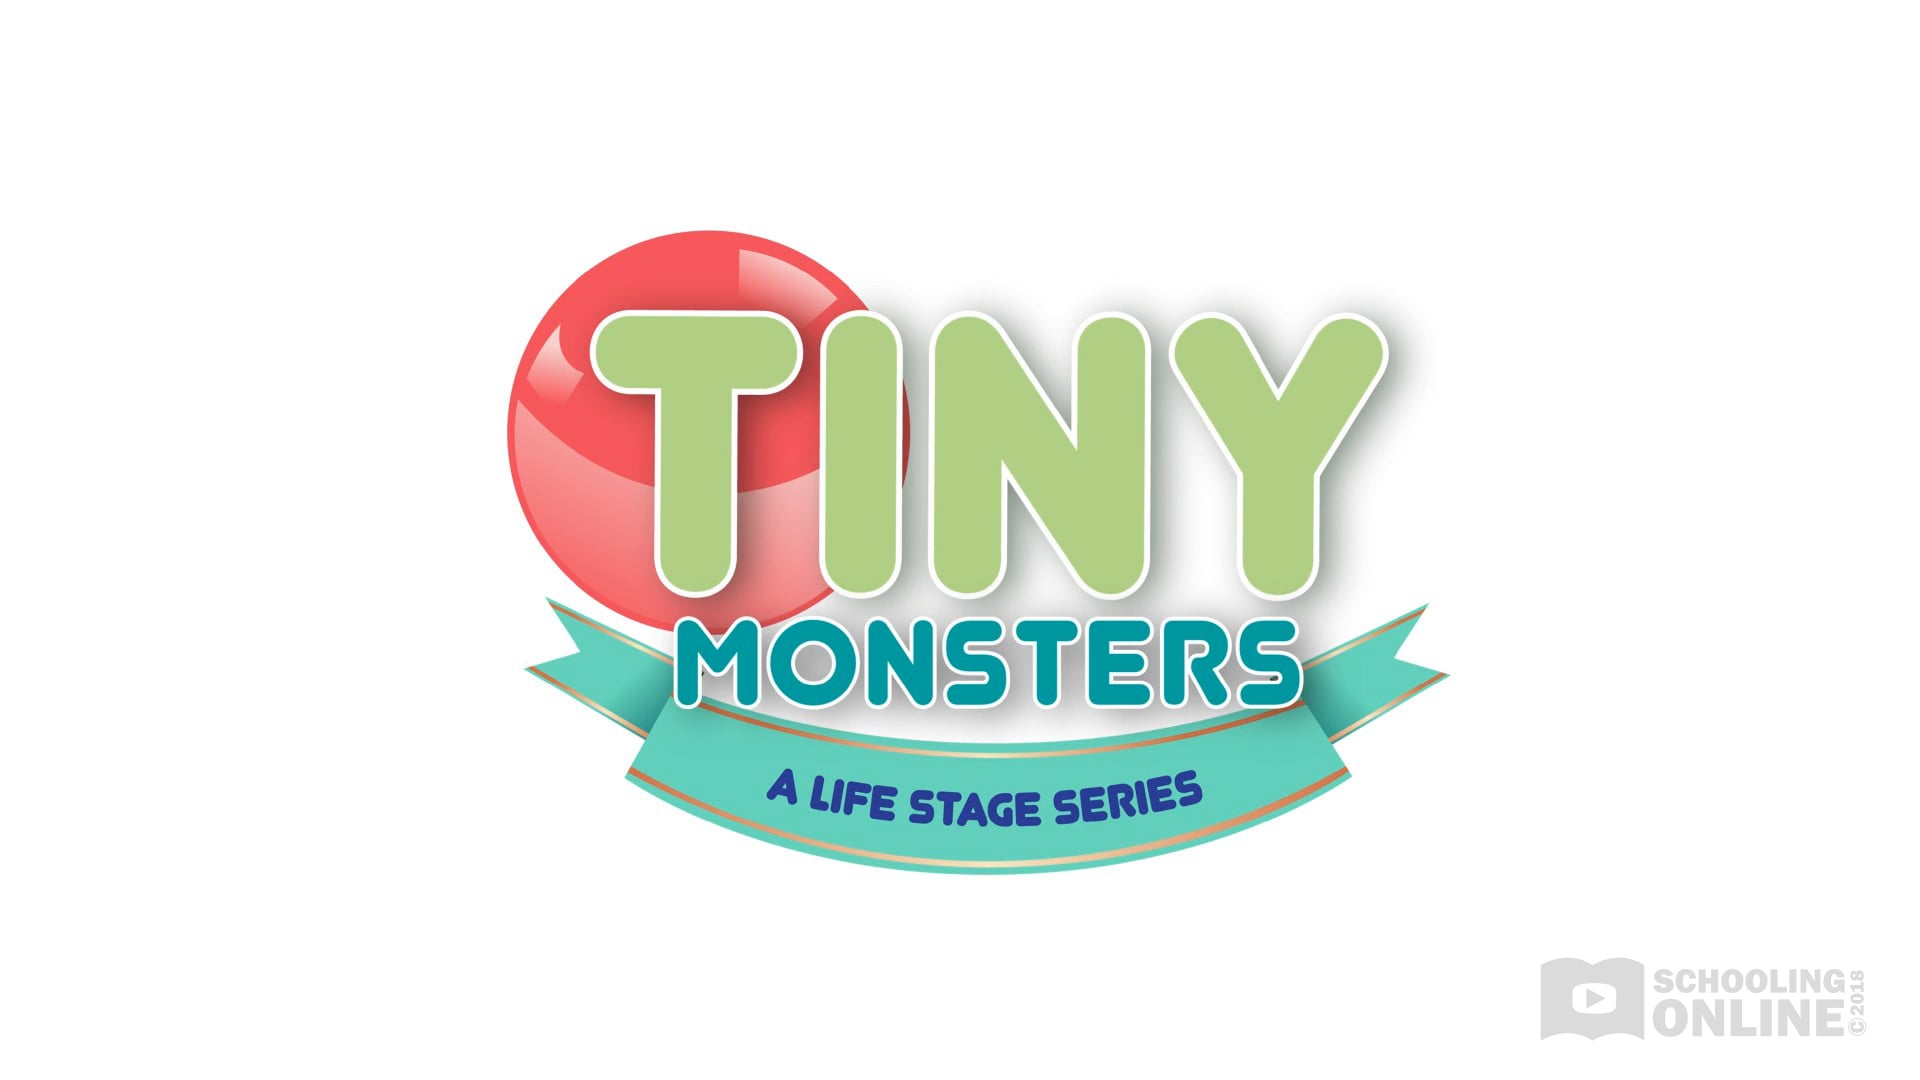 Tiny Monsters - The Life Stage Series